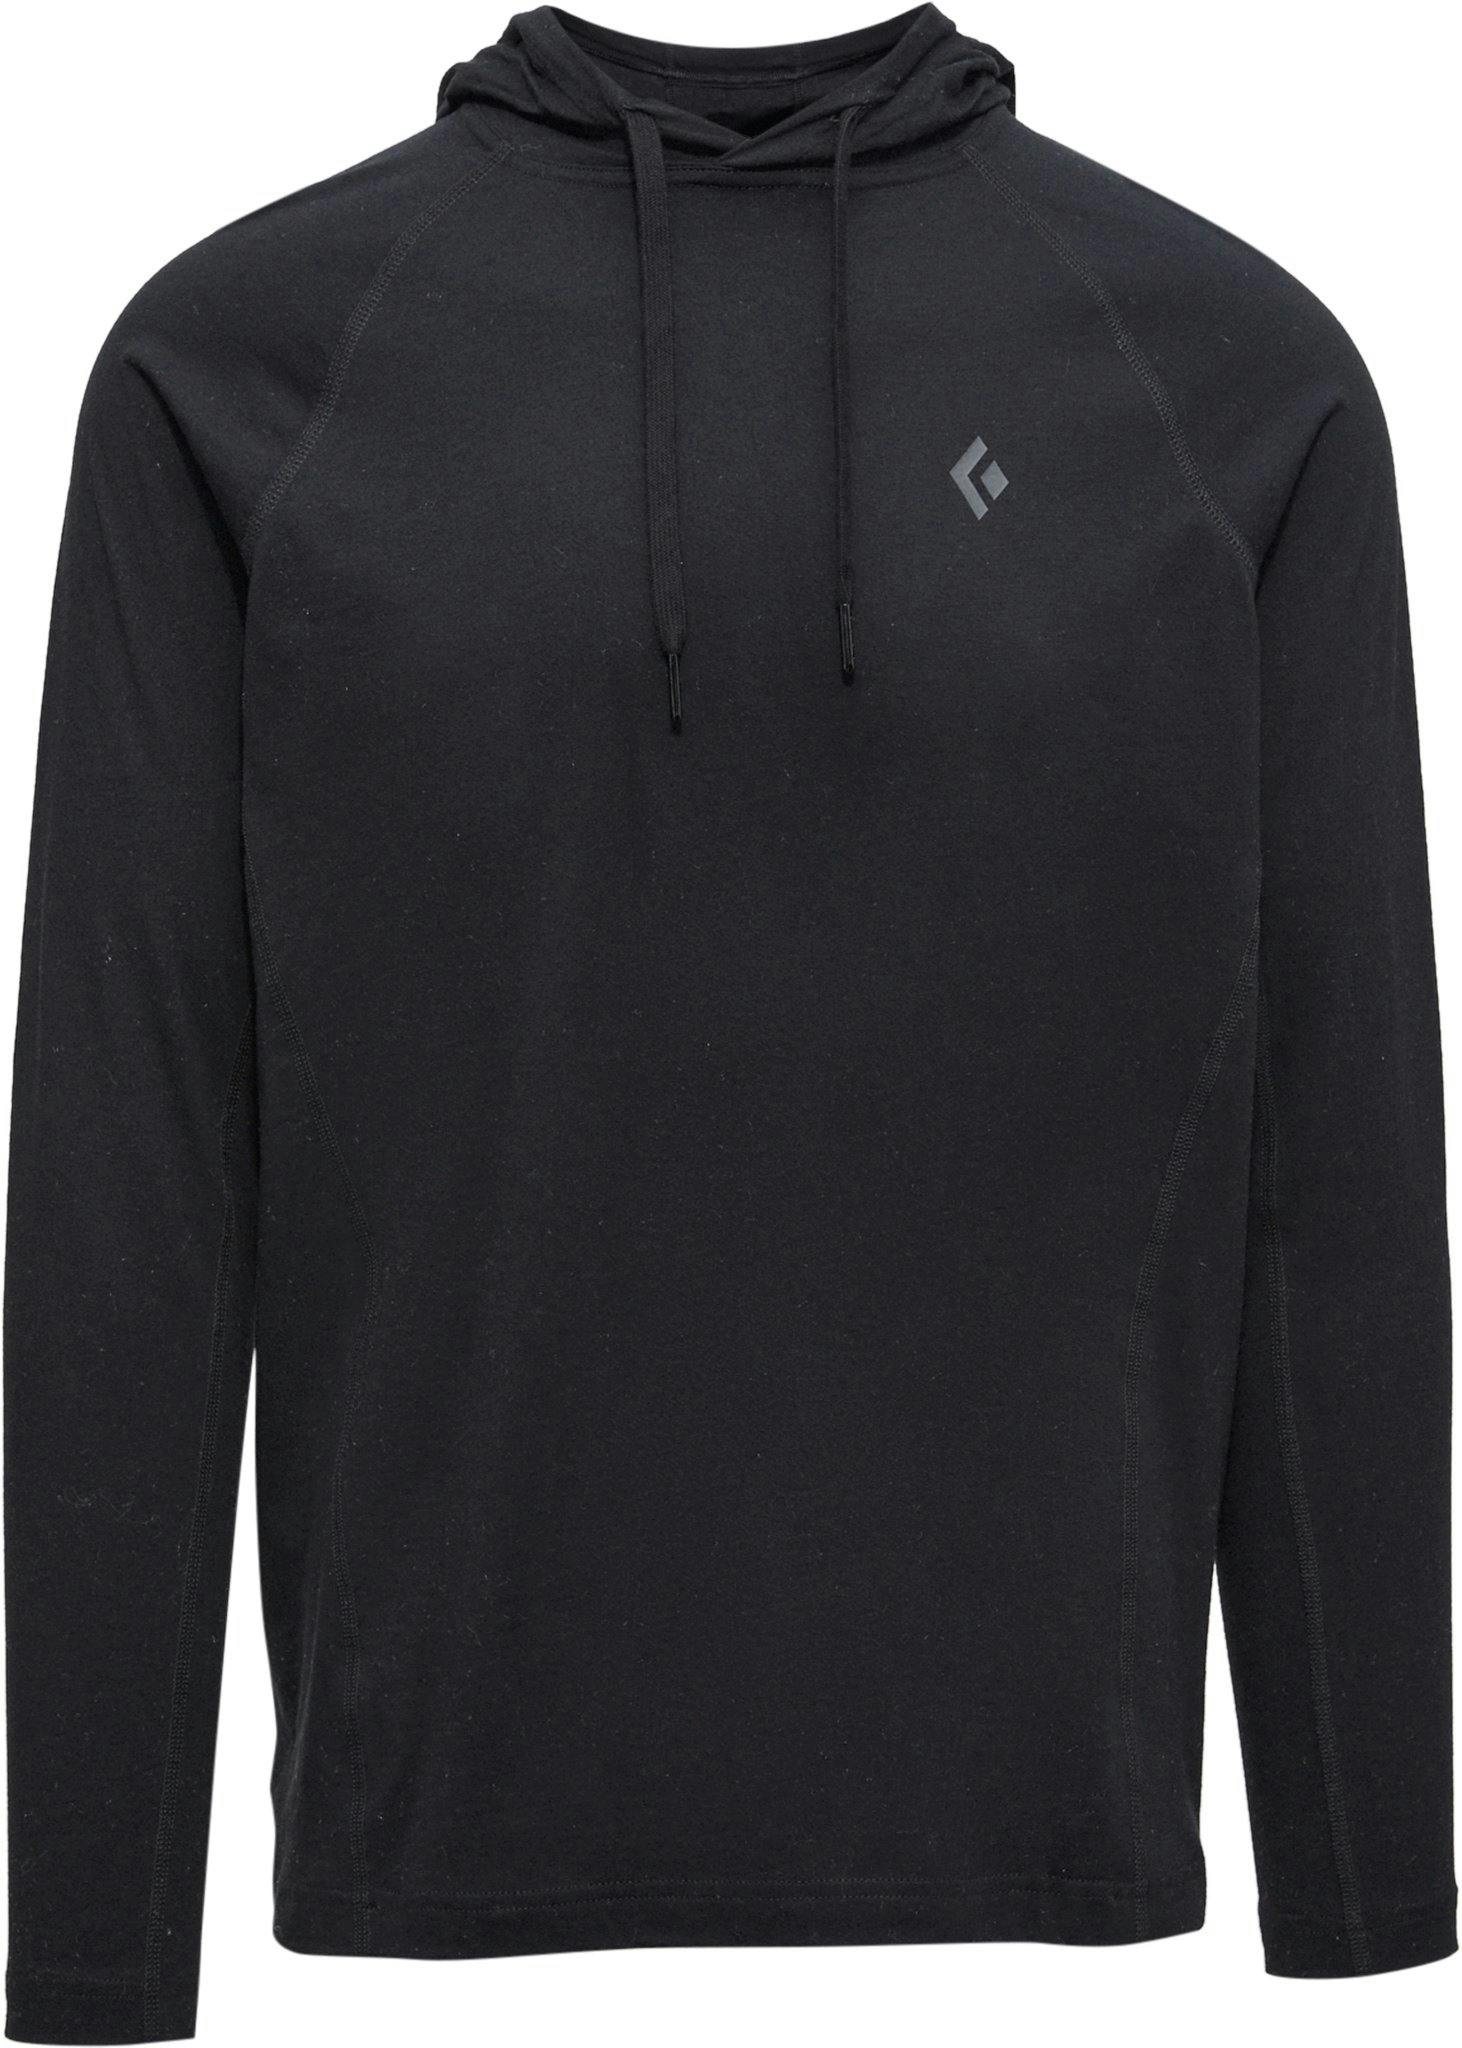 Product image for Crag Hoody - Men's